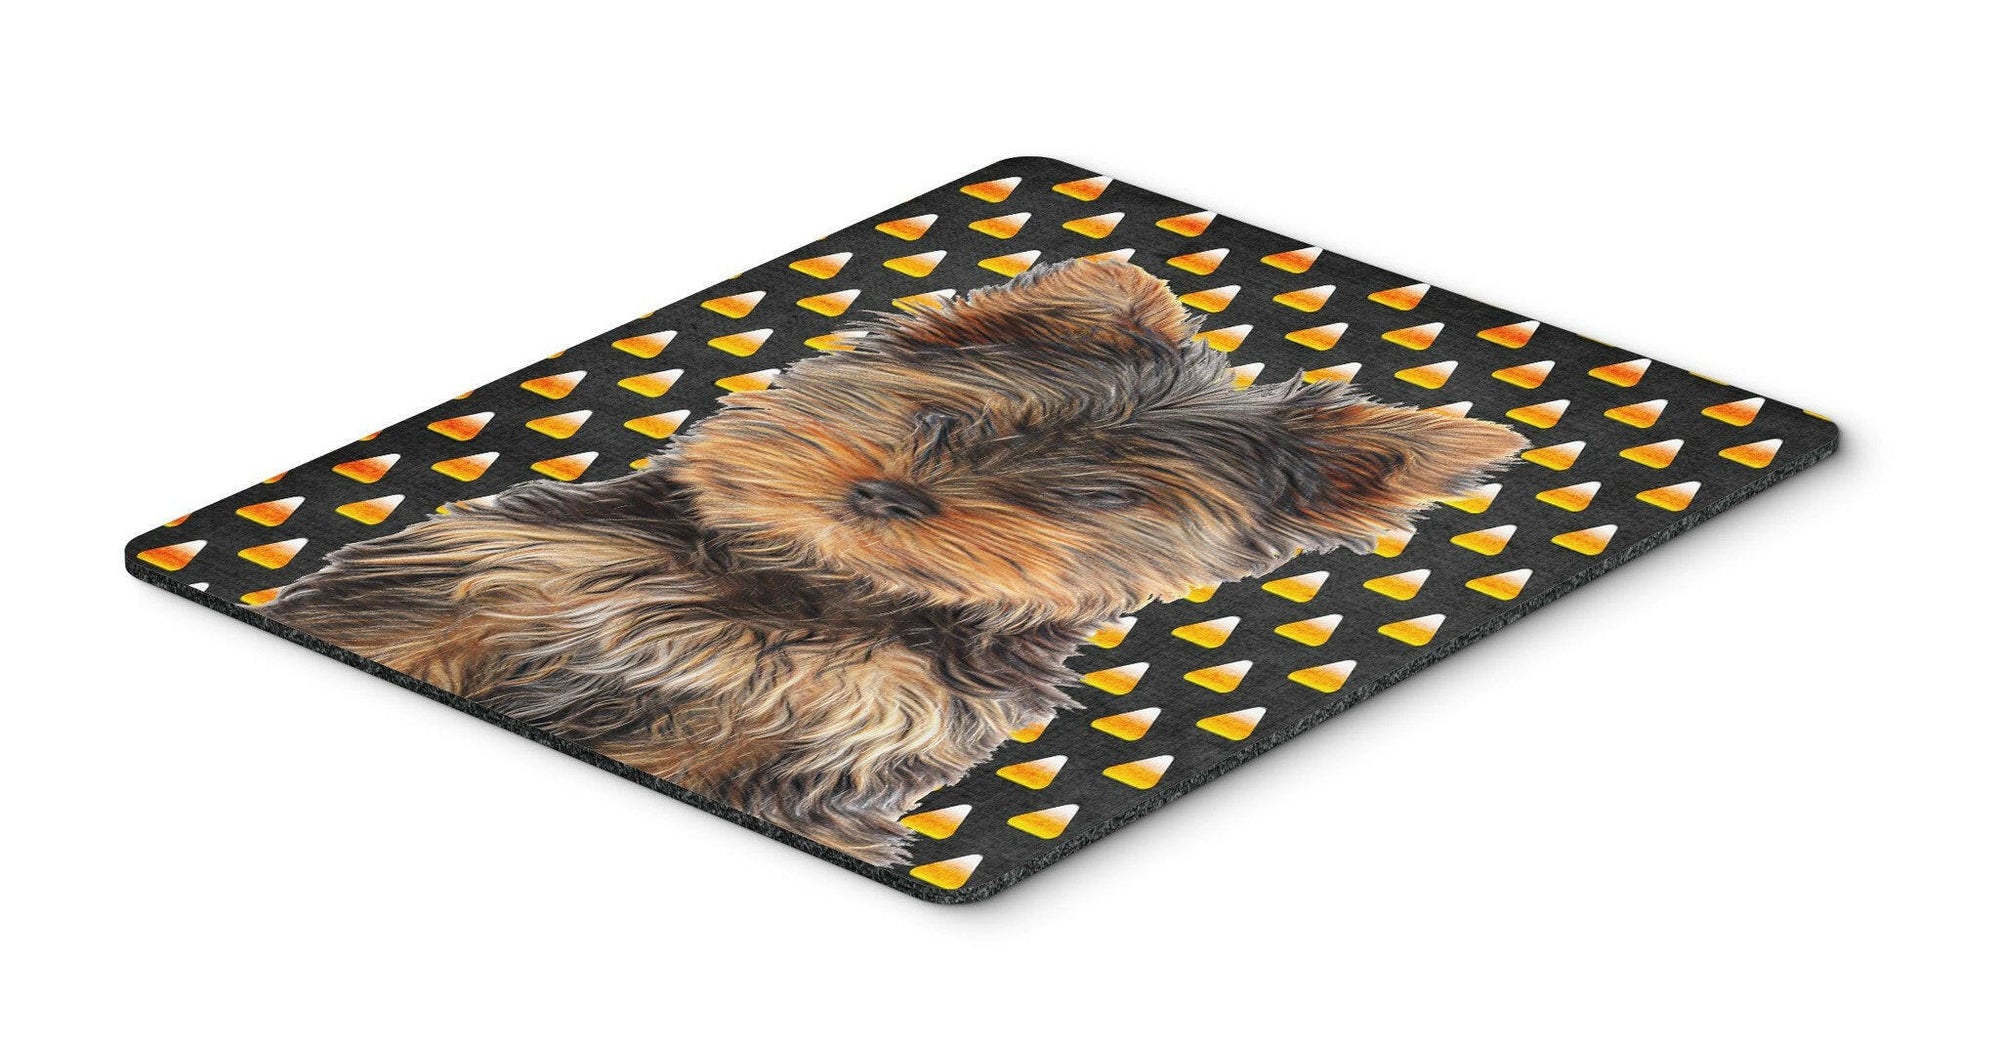 Candy Corn Halloween Yorkie Puppy / Yorkshire Terrier Mouse Pad, Hot Pad or Trivet KJ1216MP by Caroline's Treasures